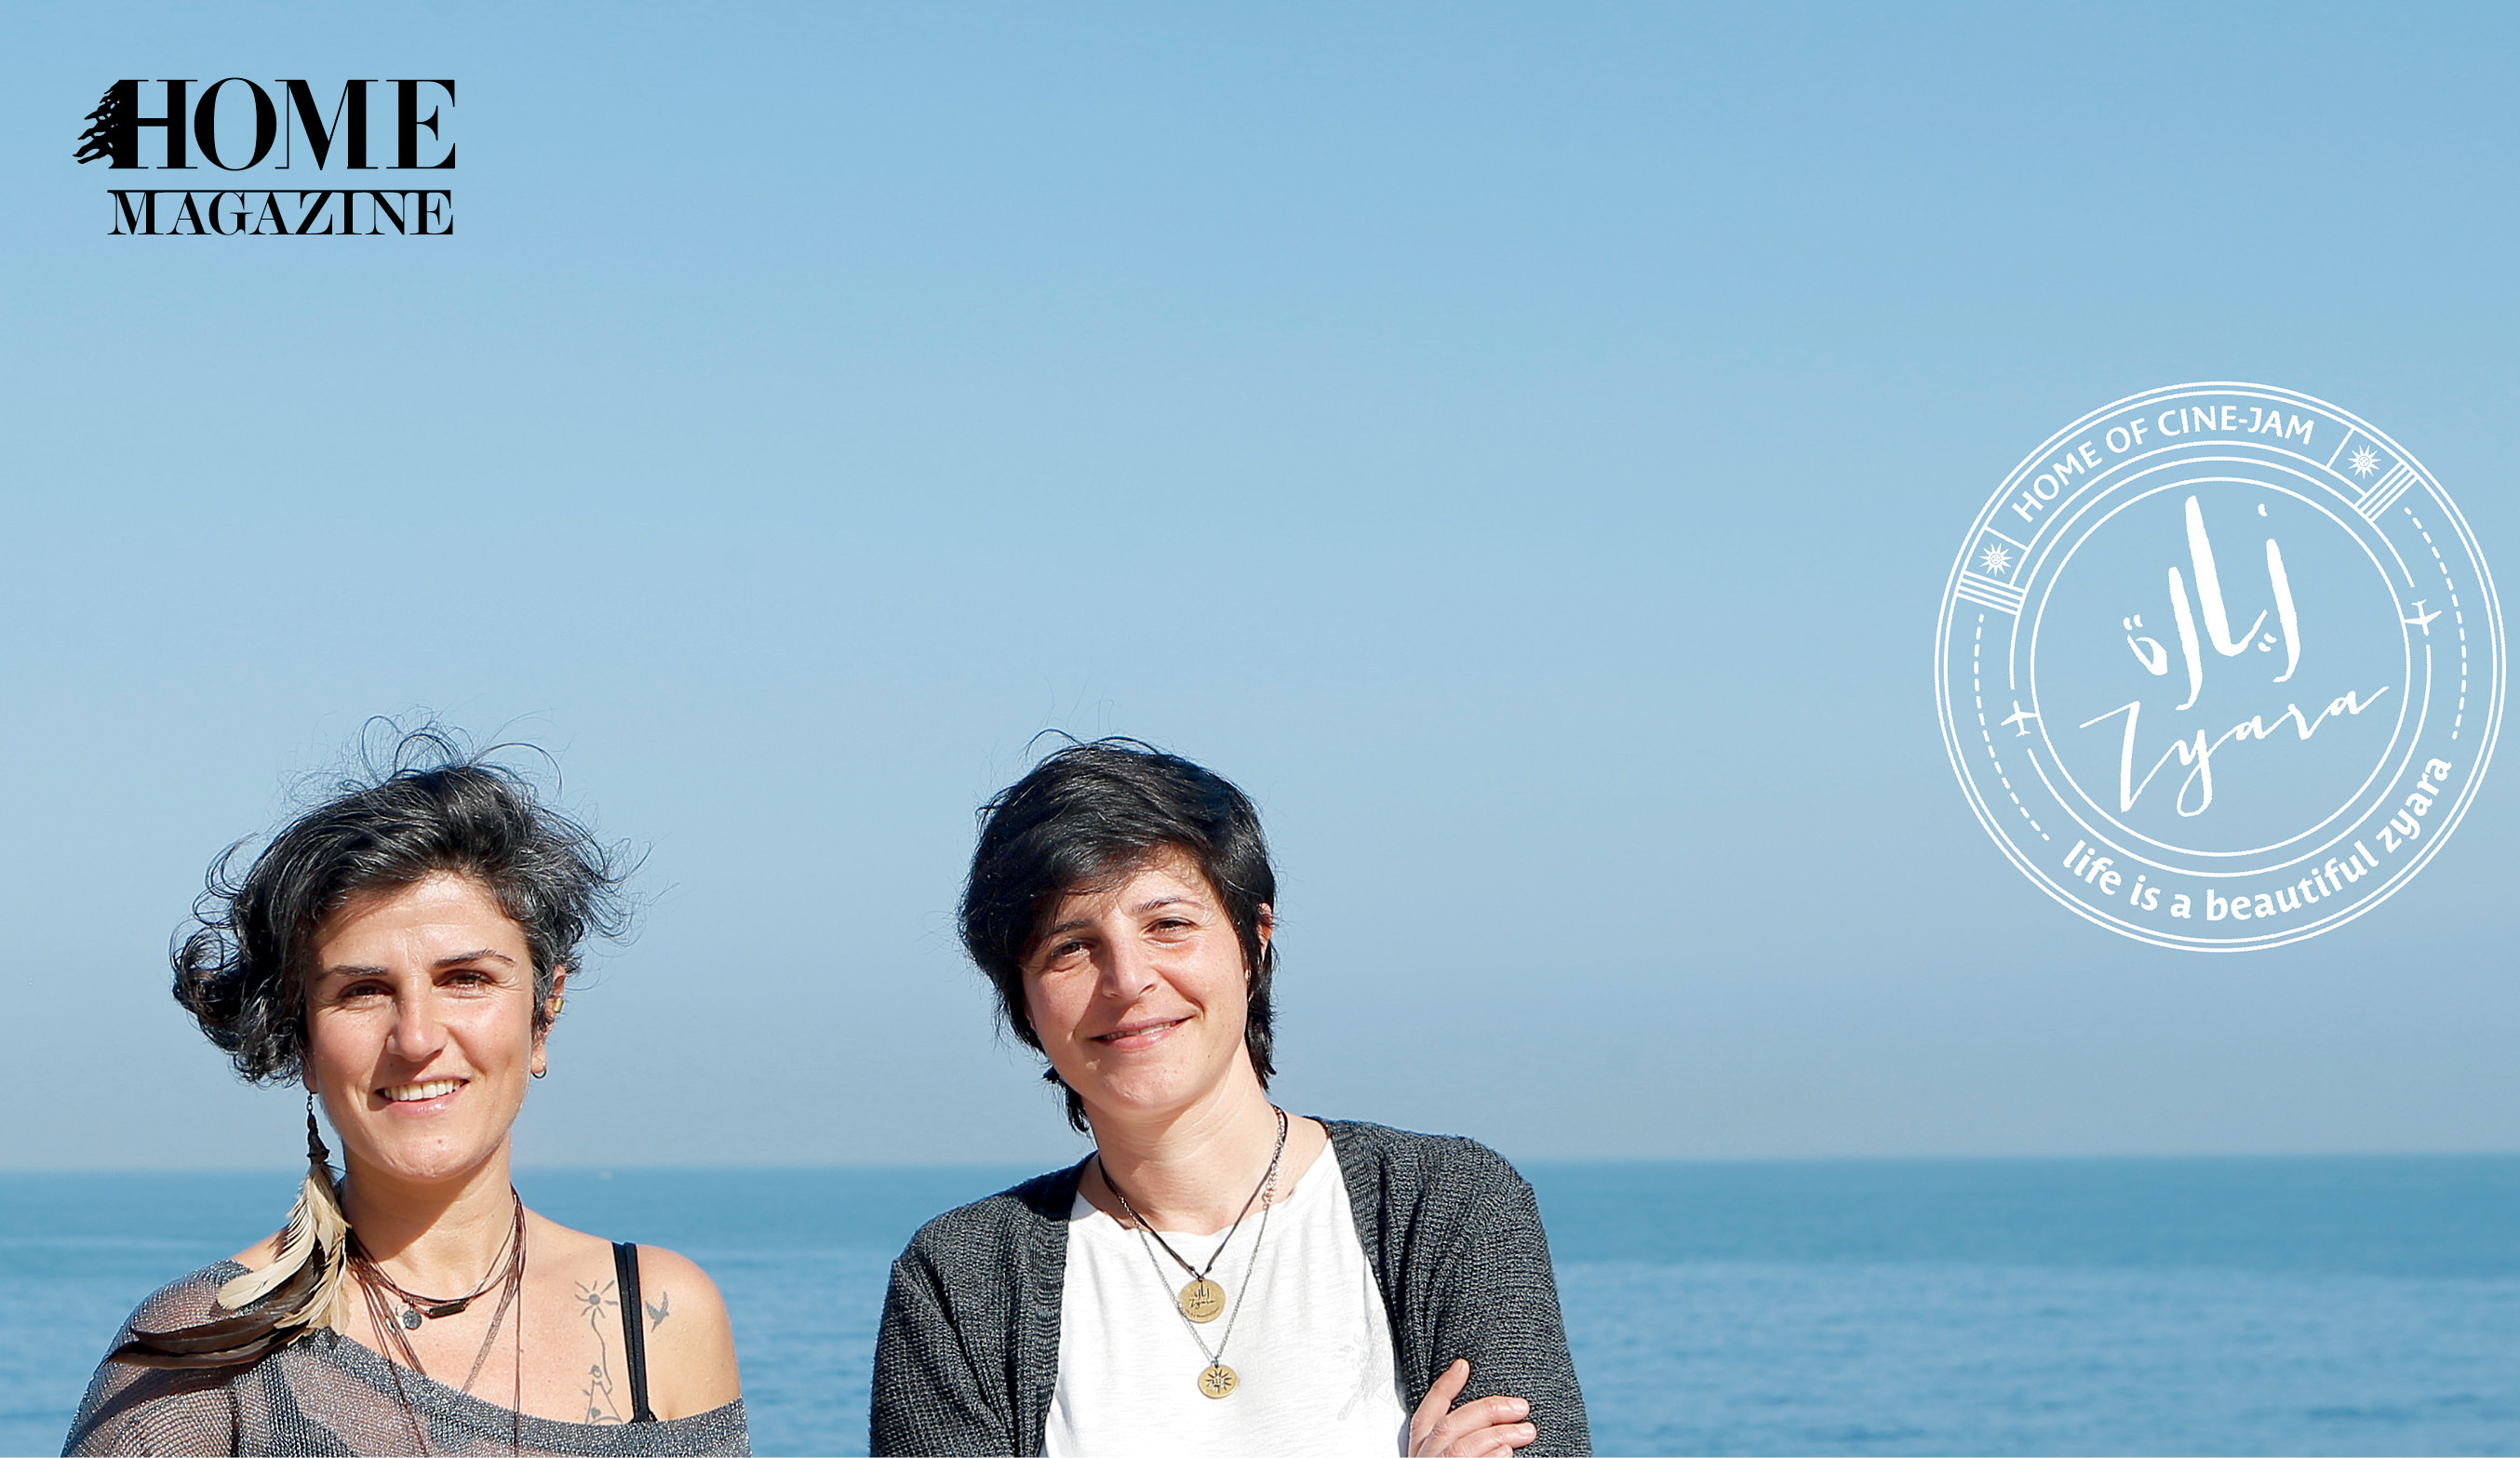 Two women with short hair and sea blue background